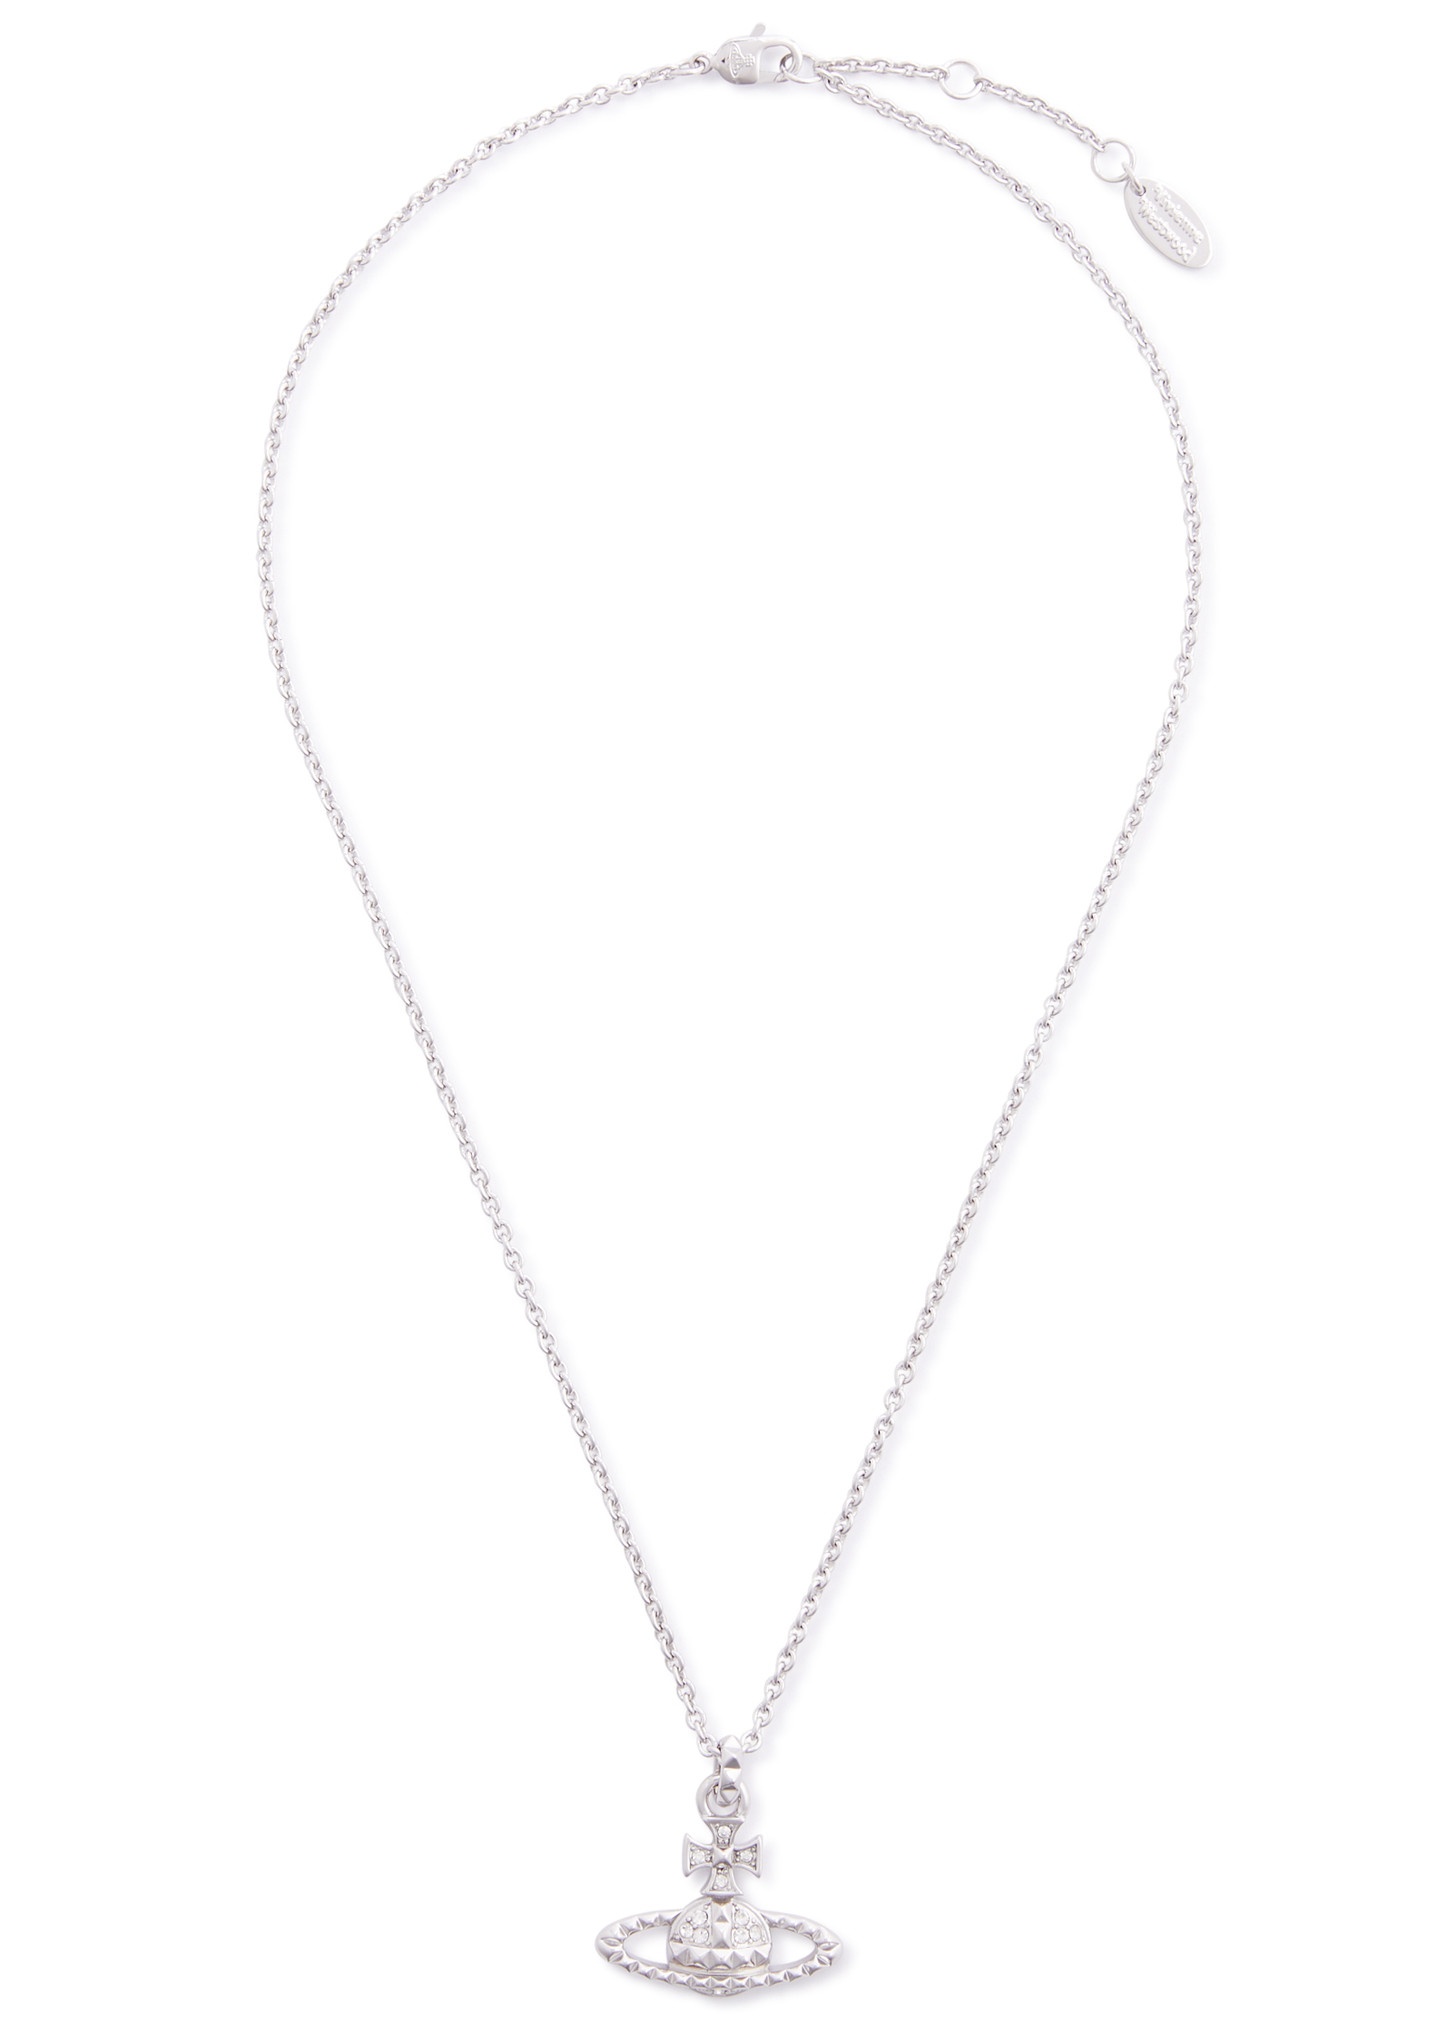 Mayfair Bas Relief orb necklace - 1